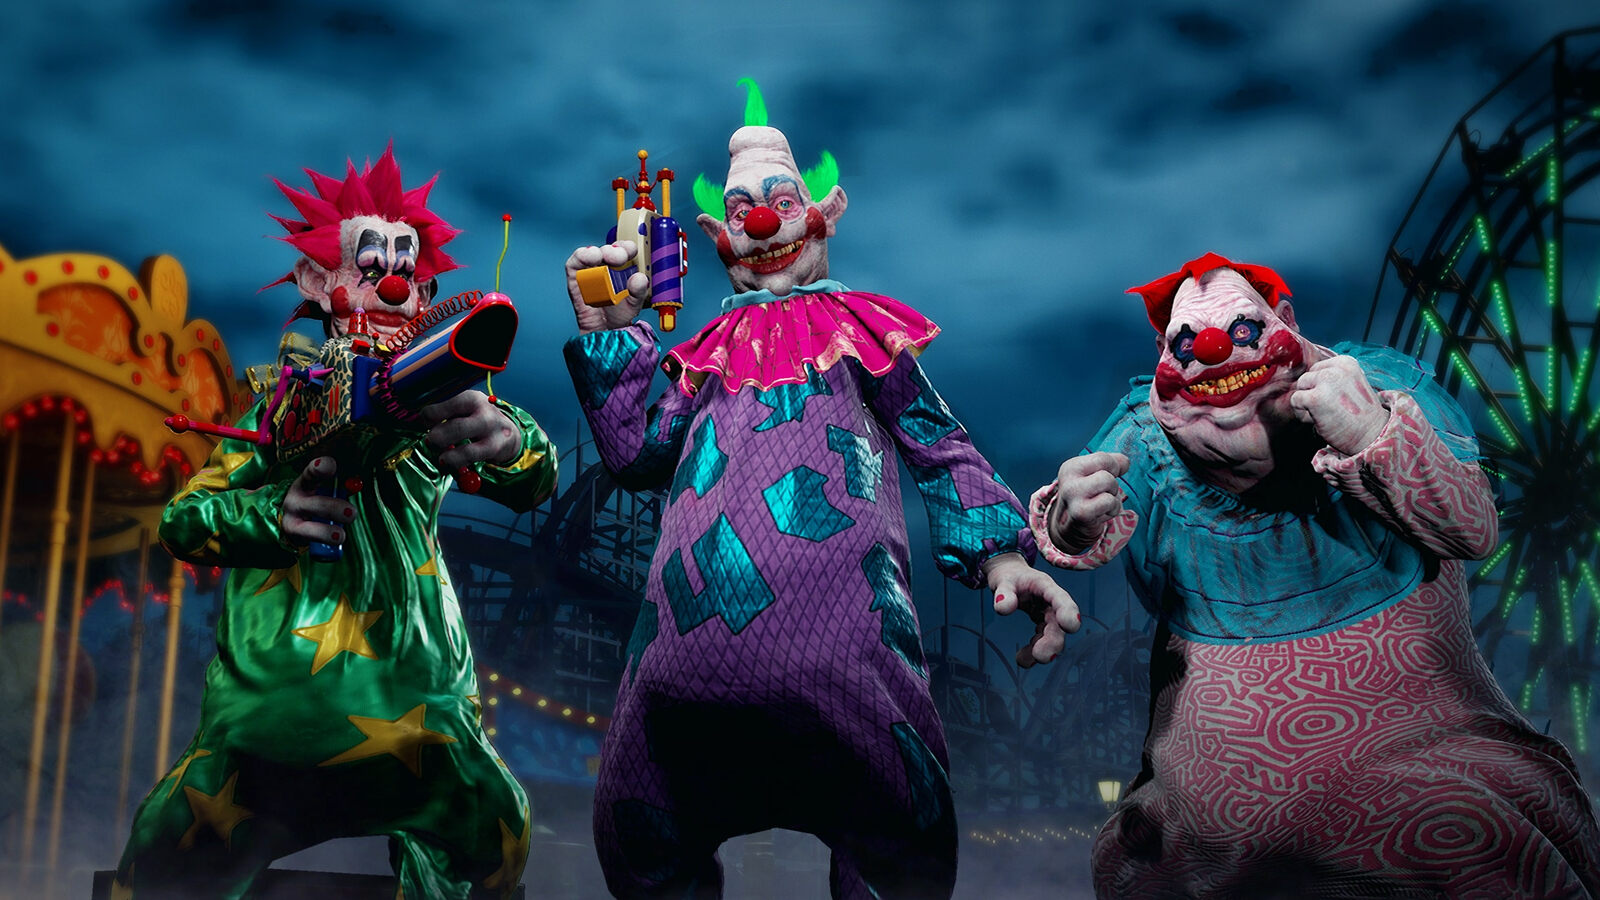 31 Facts about the movie Killer Klowns from Outer Space - Facts.net